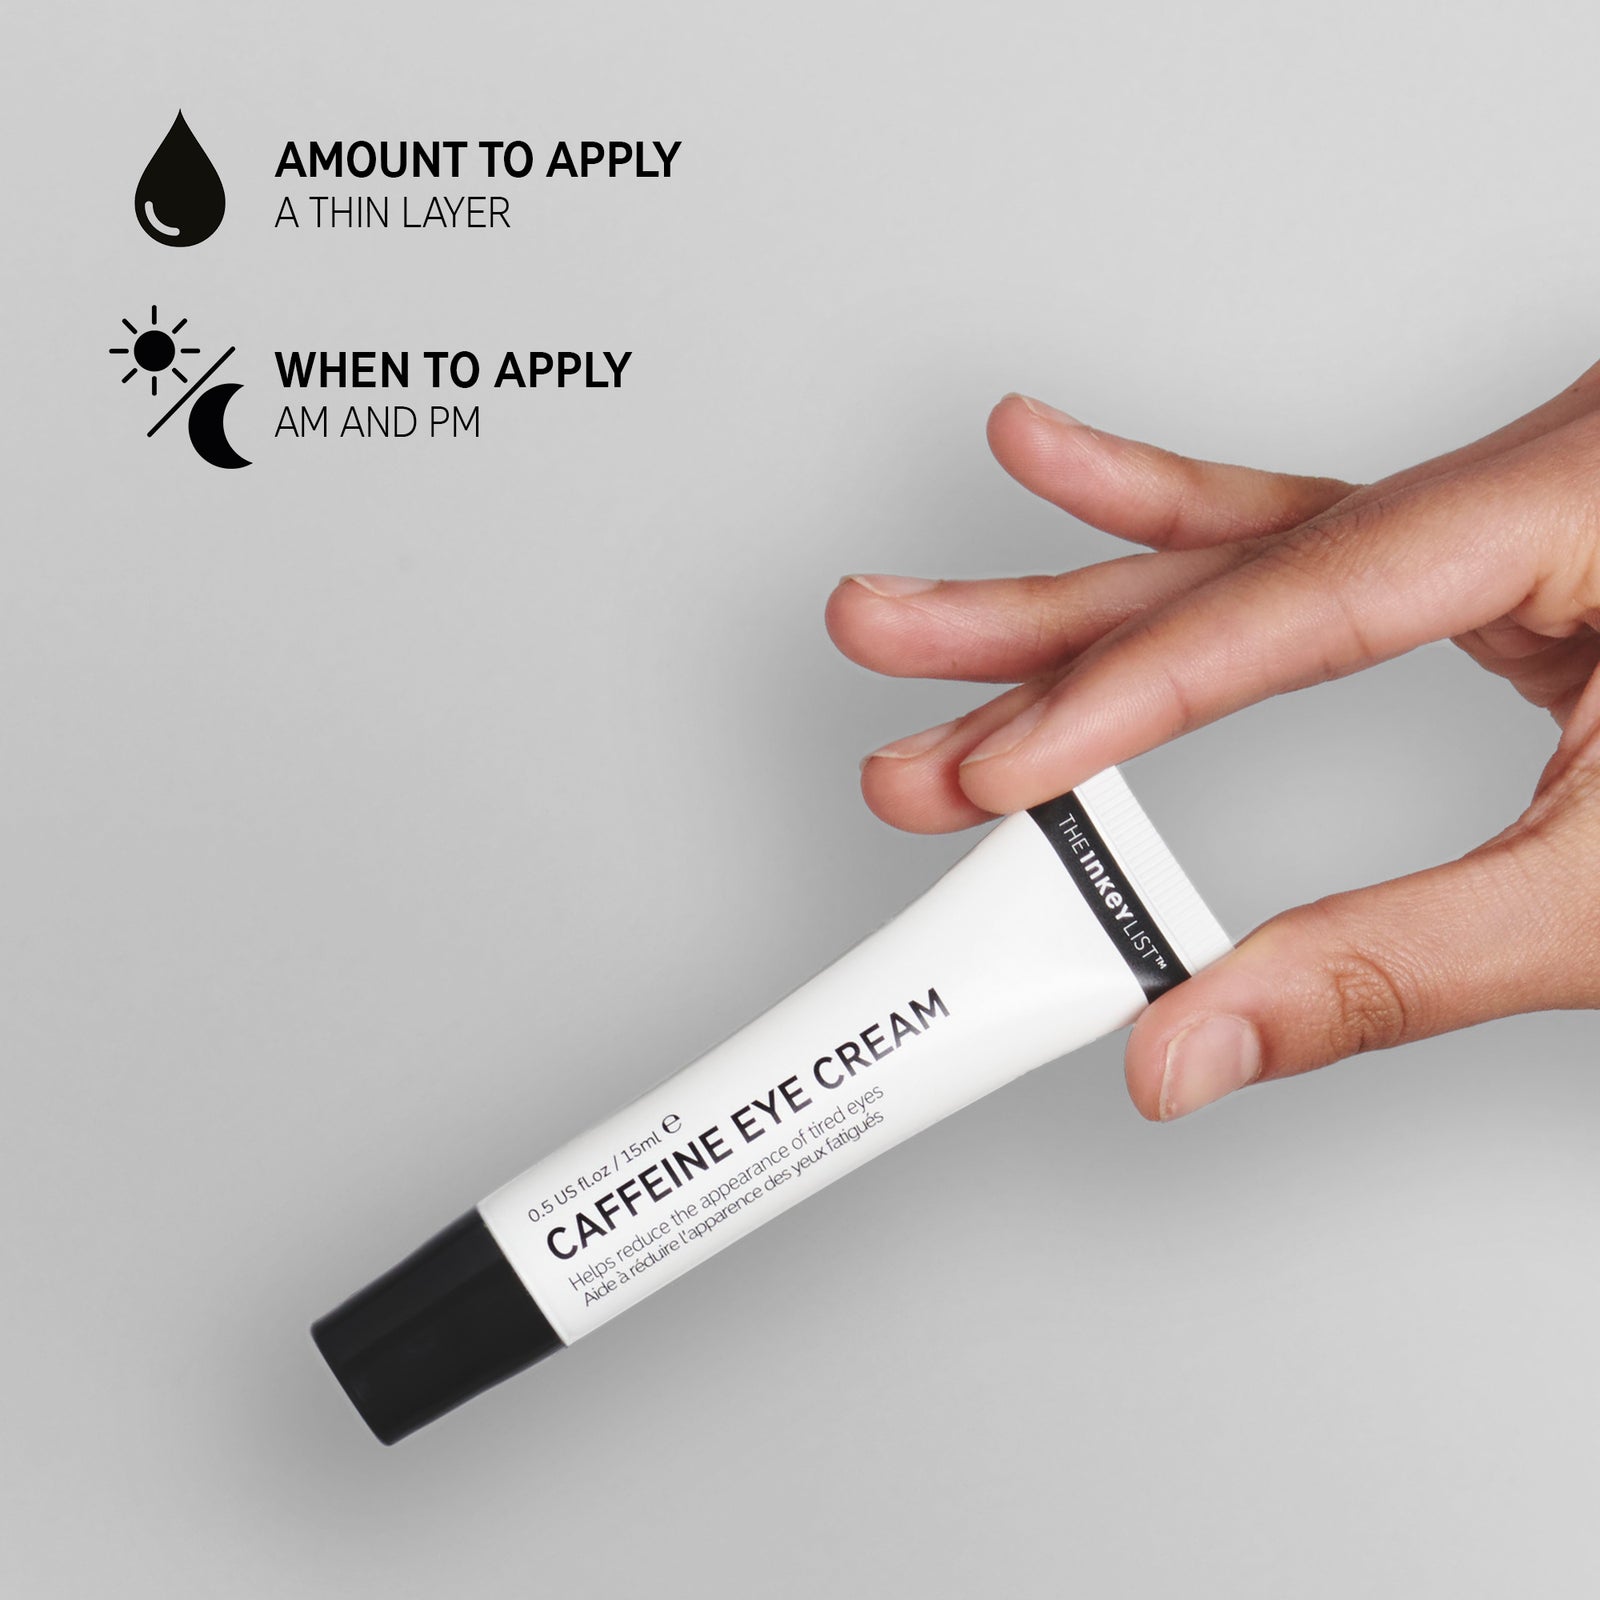 Hand holding Caffeine Eye Cream with text explaining amount to apply (a pea sized amount) and when to apply (AM and PM)